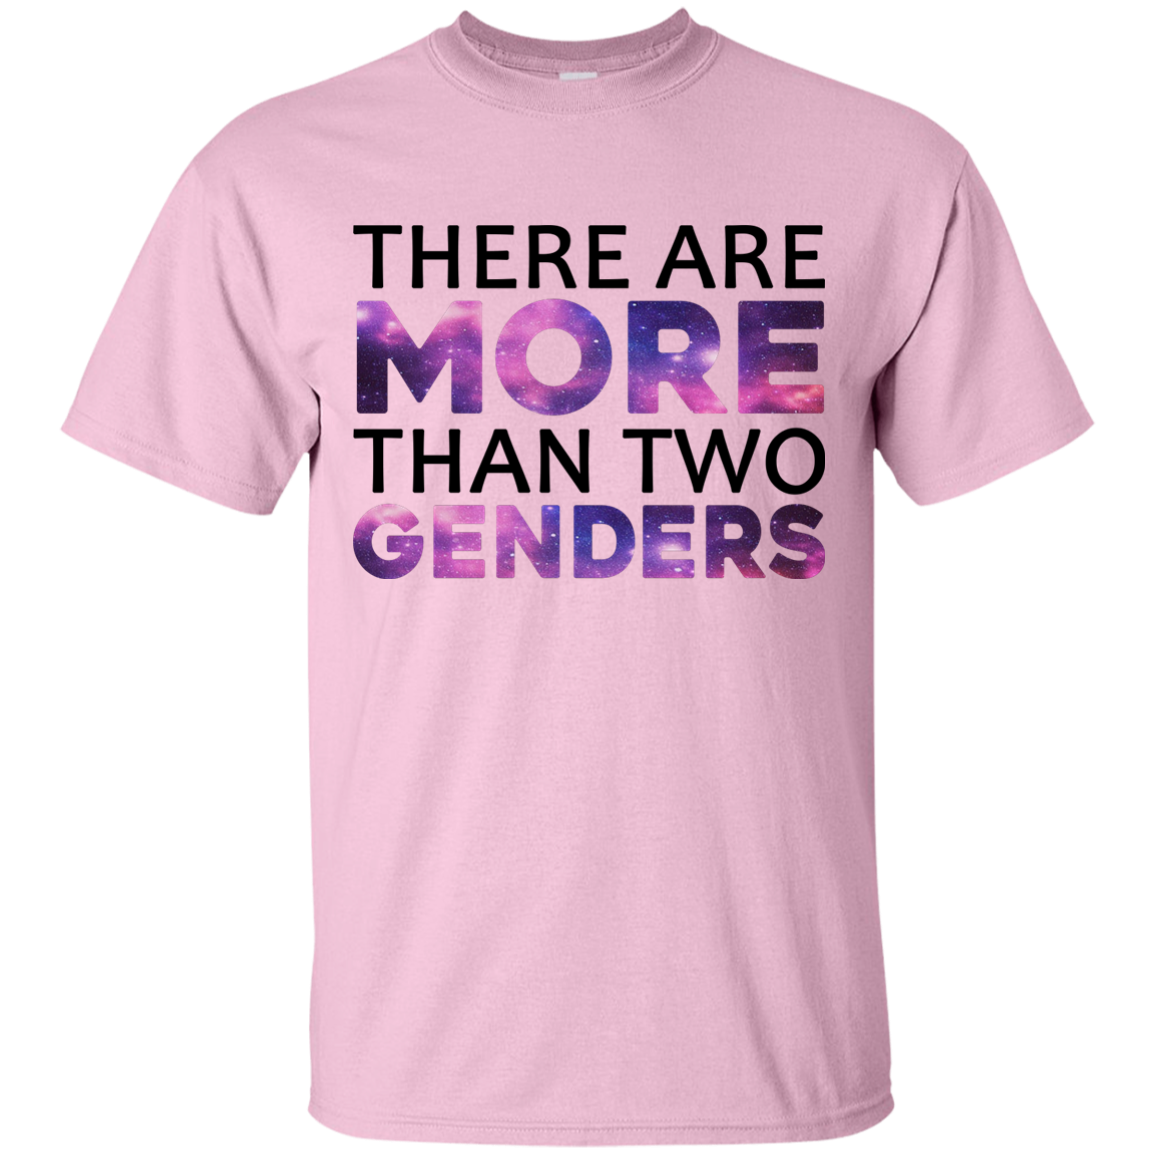 There are More than two genders shirt, hoodie, tank